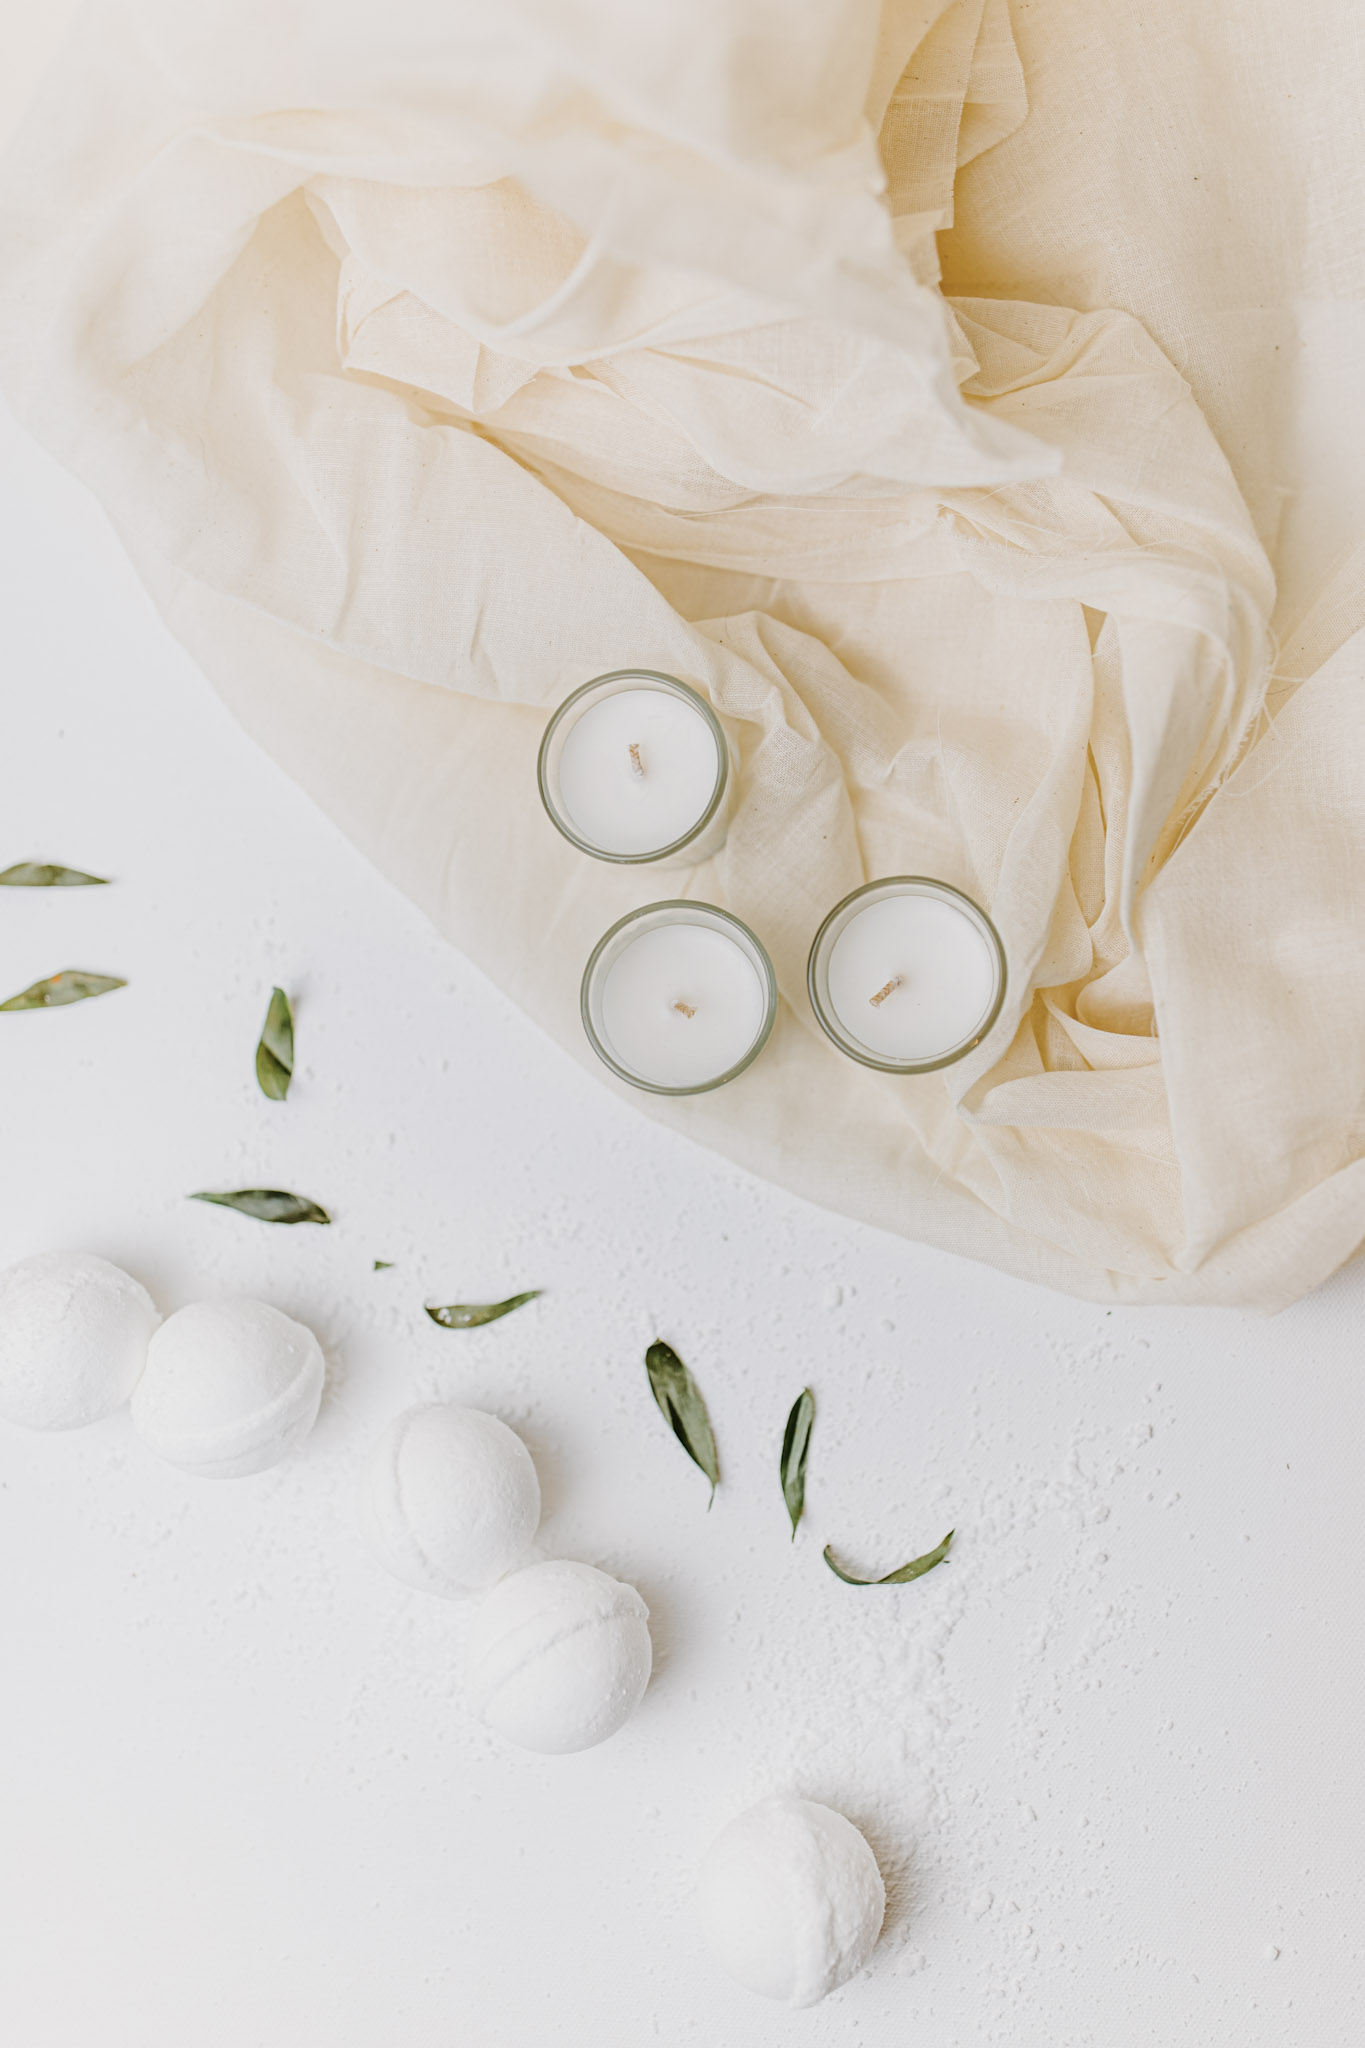 Candles and bath bombs are shown in a bathroom setting. There are leaves strewn around them. This article covers truths about CBD bombs.